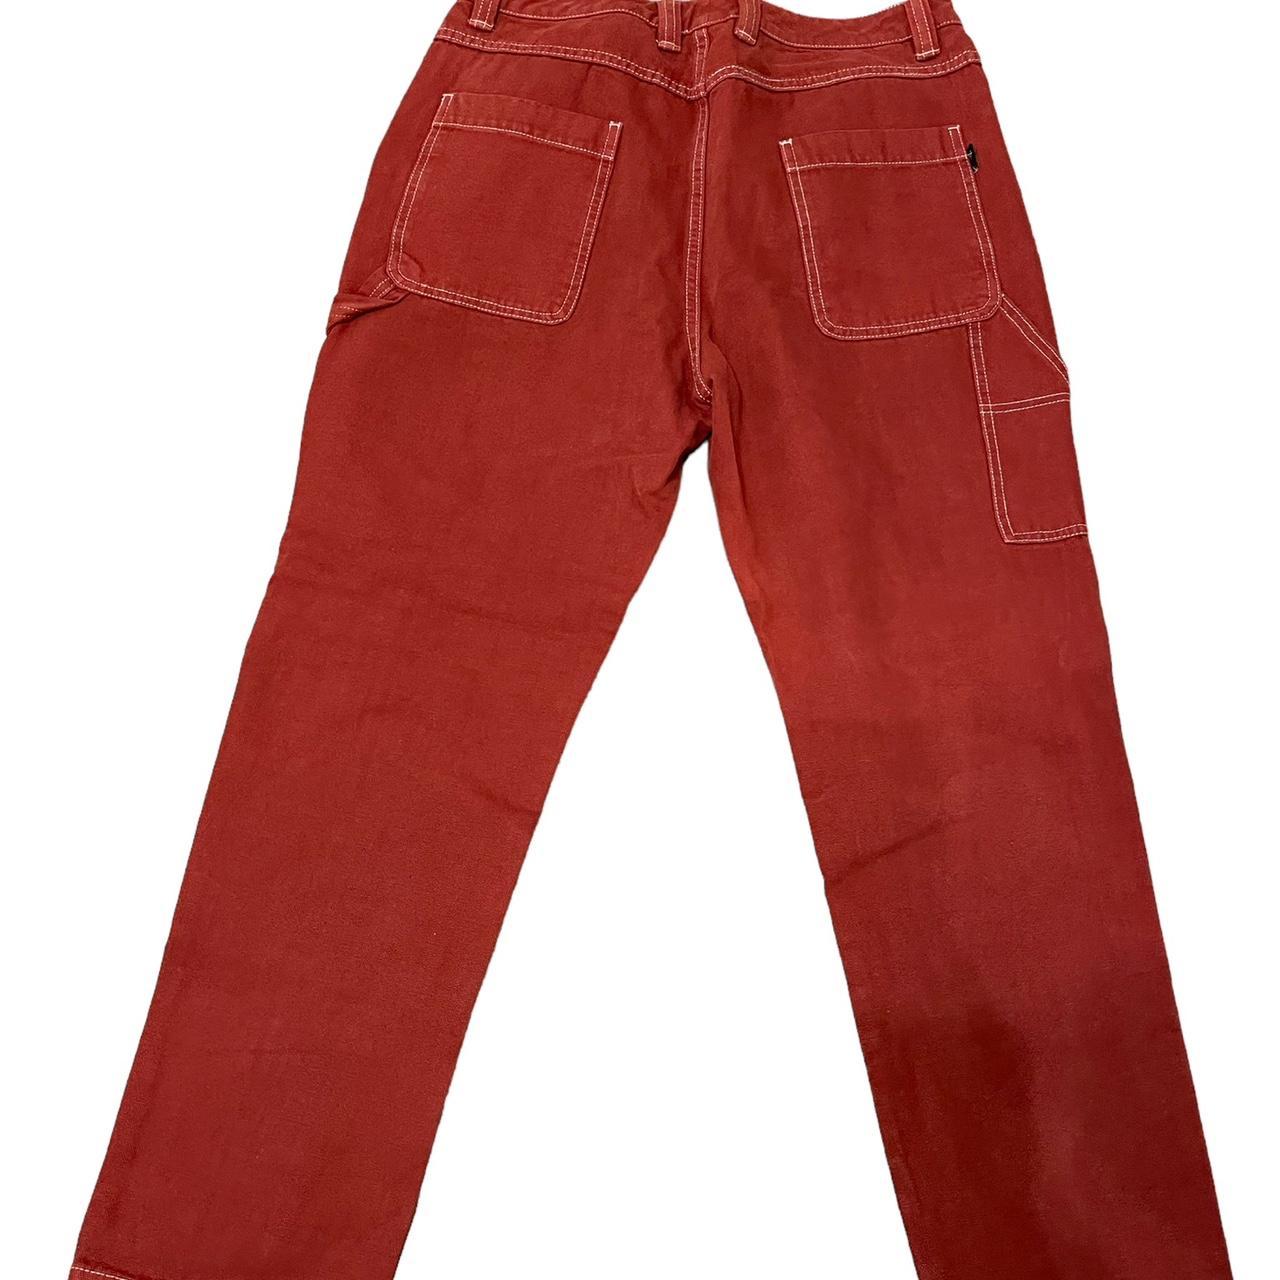 Stussy Faded red double knee carpenter jeans 32... - Depop